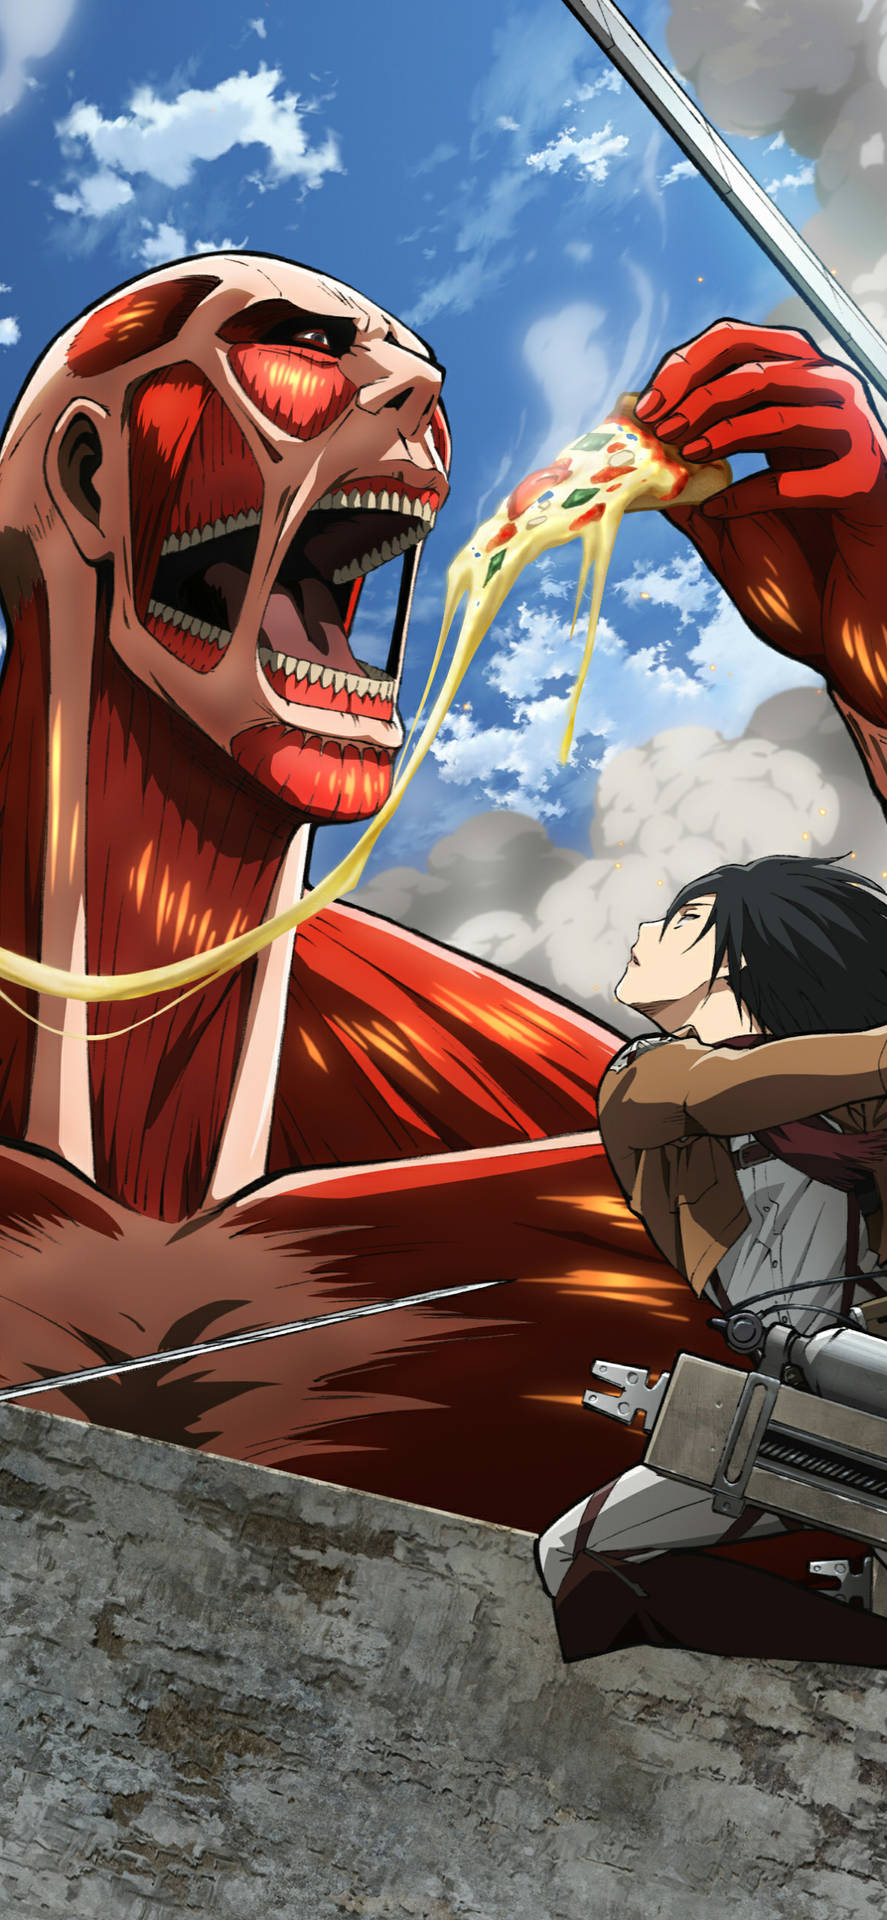 Colossal Eating Pizza Attack On Titan Iphone Wallpaper